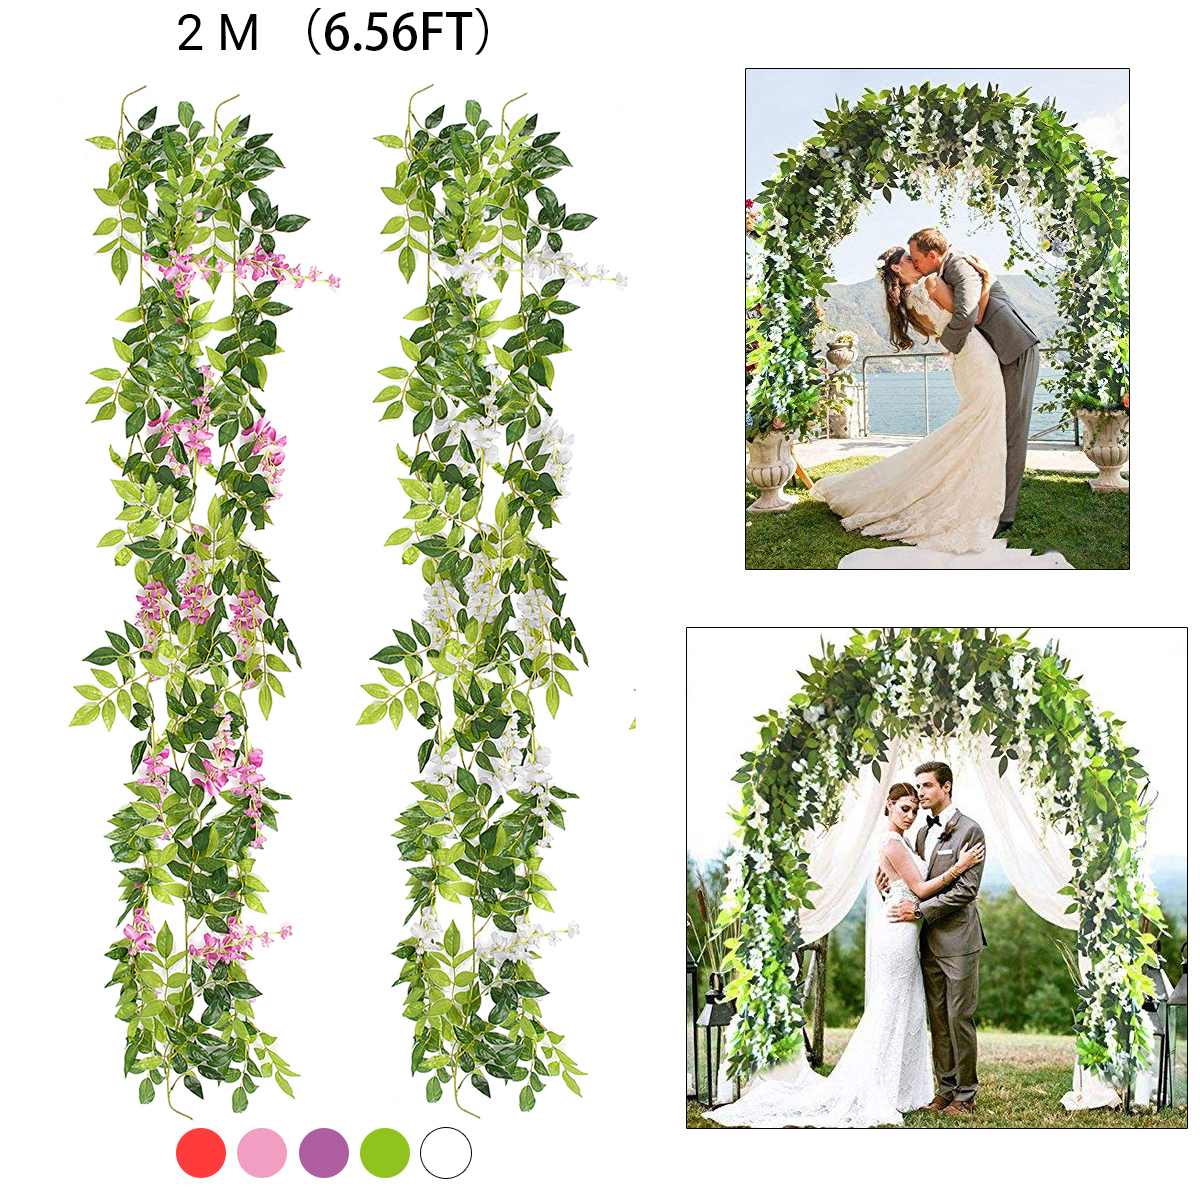 Wisteria-Garland-Artificial-Flowers-Bunch-Wedding-Home-Hanging-Ivy-Decorations-2m-1496339-4